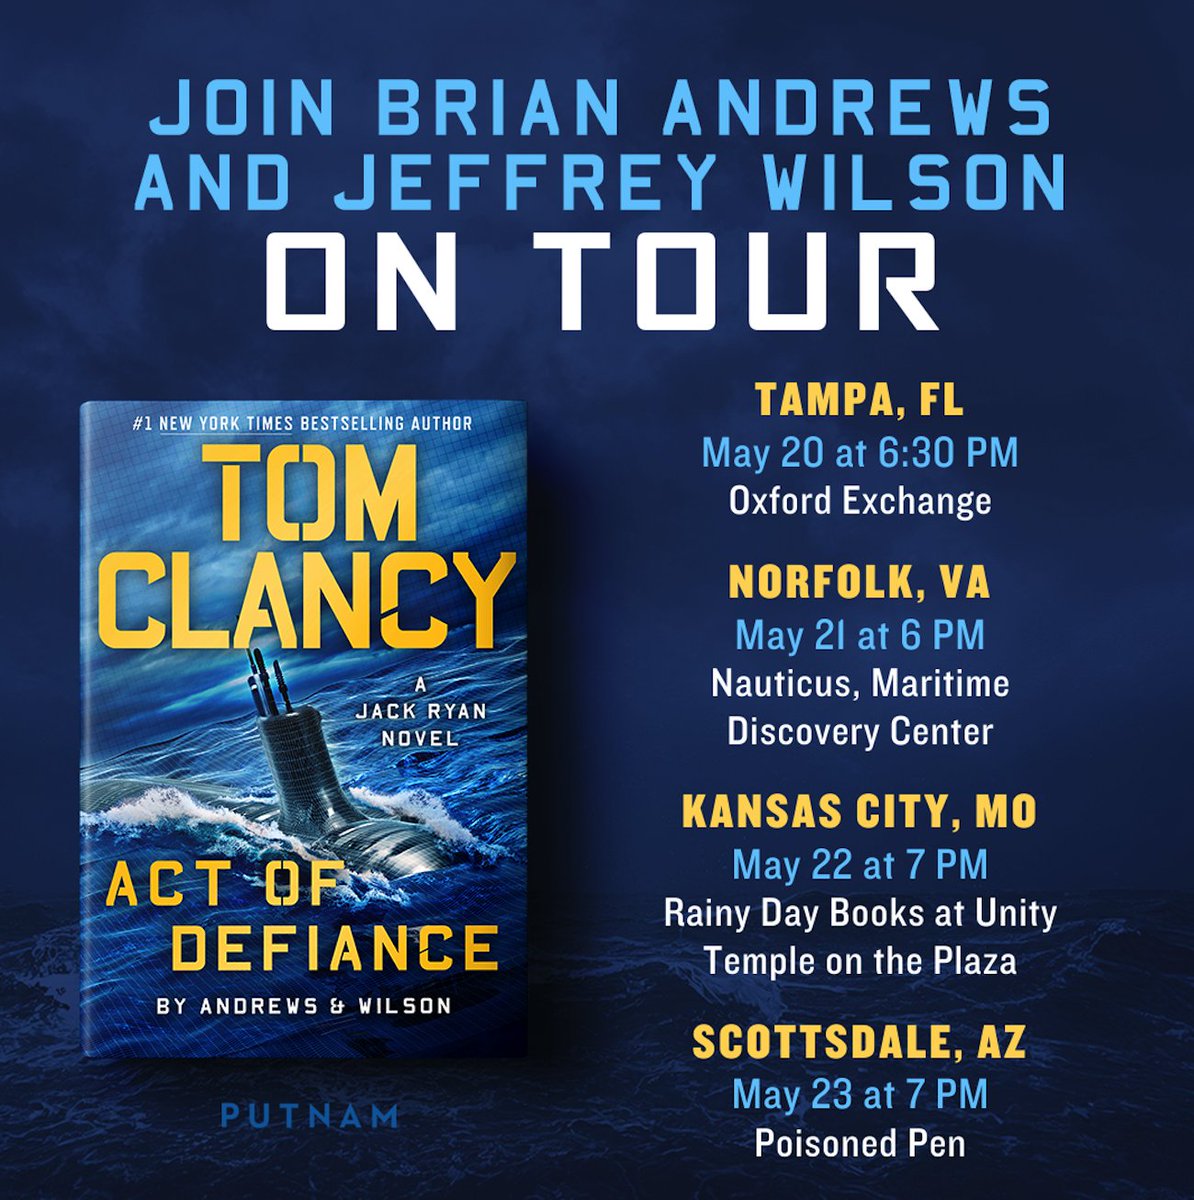 The ACT OF DEFIANCE #JackRyan #TomClancy tour is set! 🎉🚀Come see us at: @OxfordExchange in #Tampa, @NauticusNorfolk in #Norfolk, @RainyDayBooks in #KC, @poisonedpen in #Phoenix! LINKS FOR ALL EVENTS 👉: andrews-wilson.com/events @penguinrandom @PutnamBooks @TheRealBookSpy